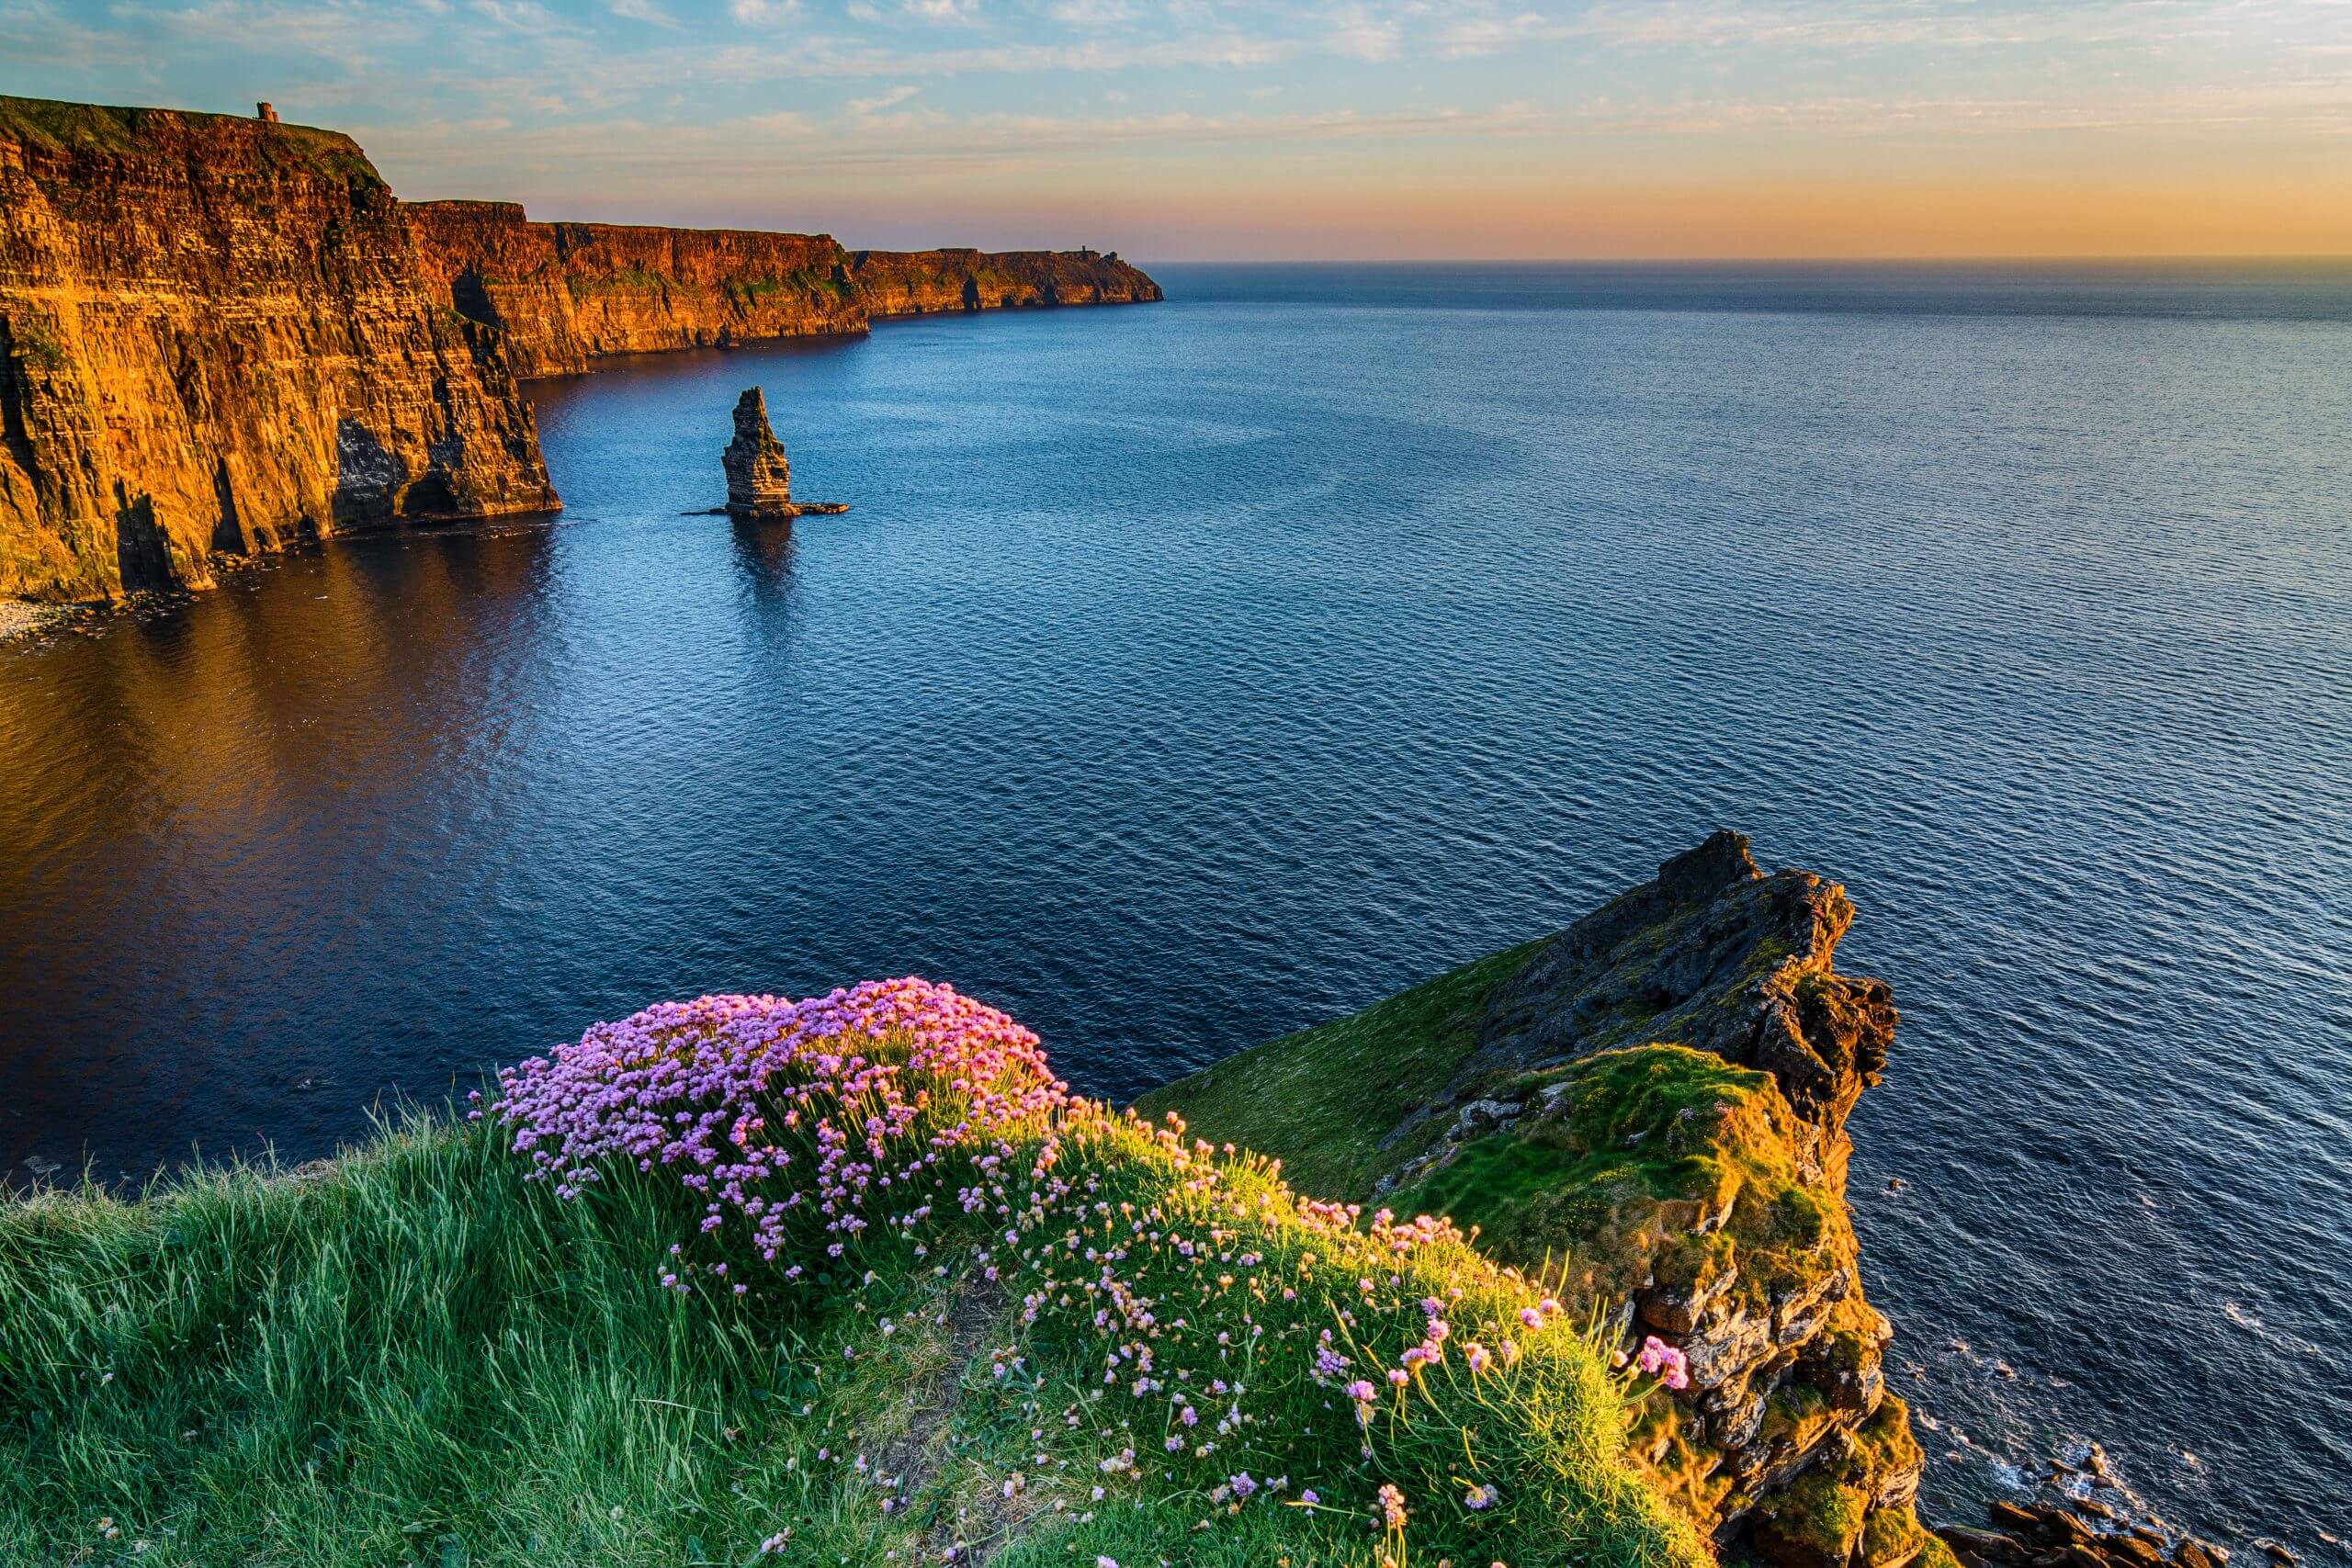 Views at the Cliffs of Moher